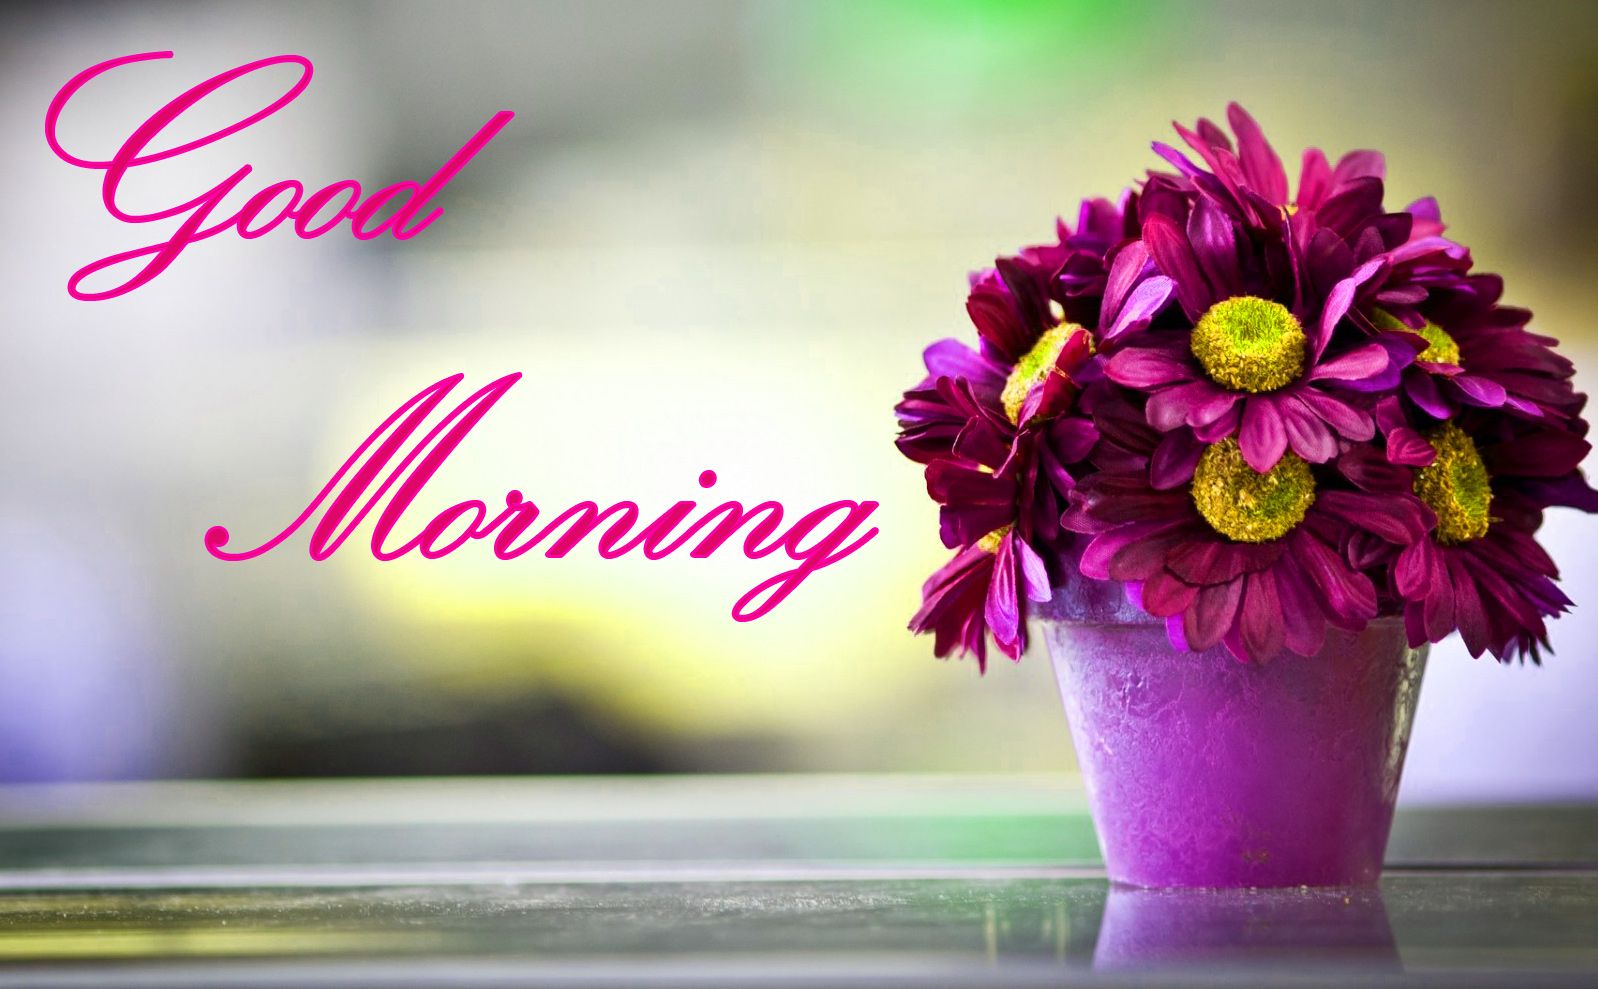 Latest Good Morning Images Wallpaper Photo Pics Hd - Good Morning Images Hd - HD Wallpaper 